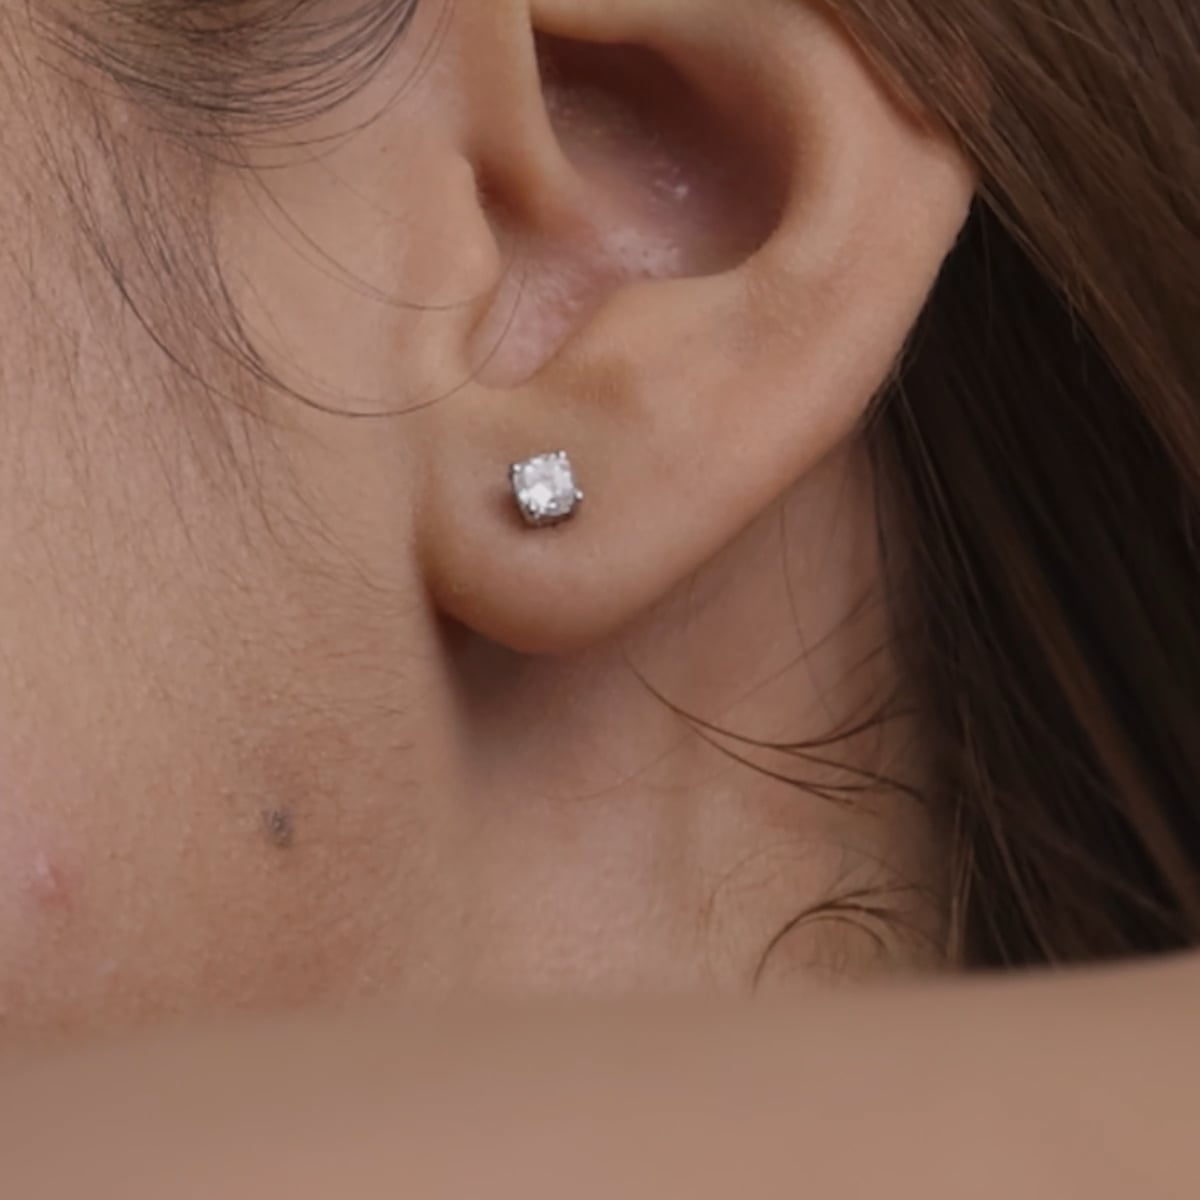 product video for 6 ctw Cushion Lab Grown Diamond Solitaire Certified Stud Earrings